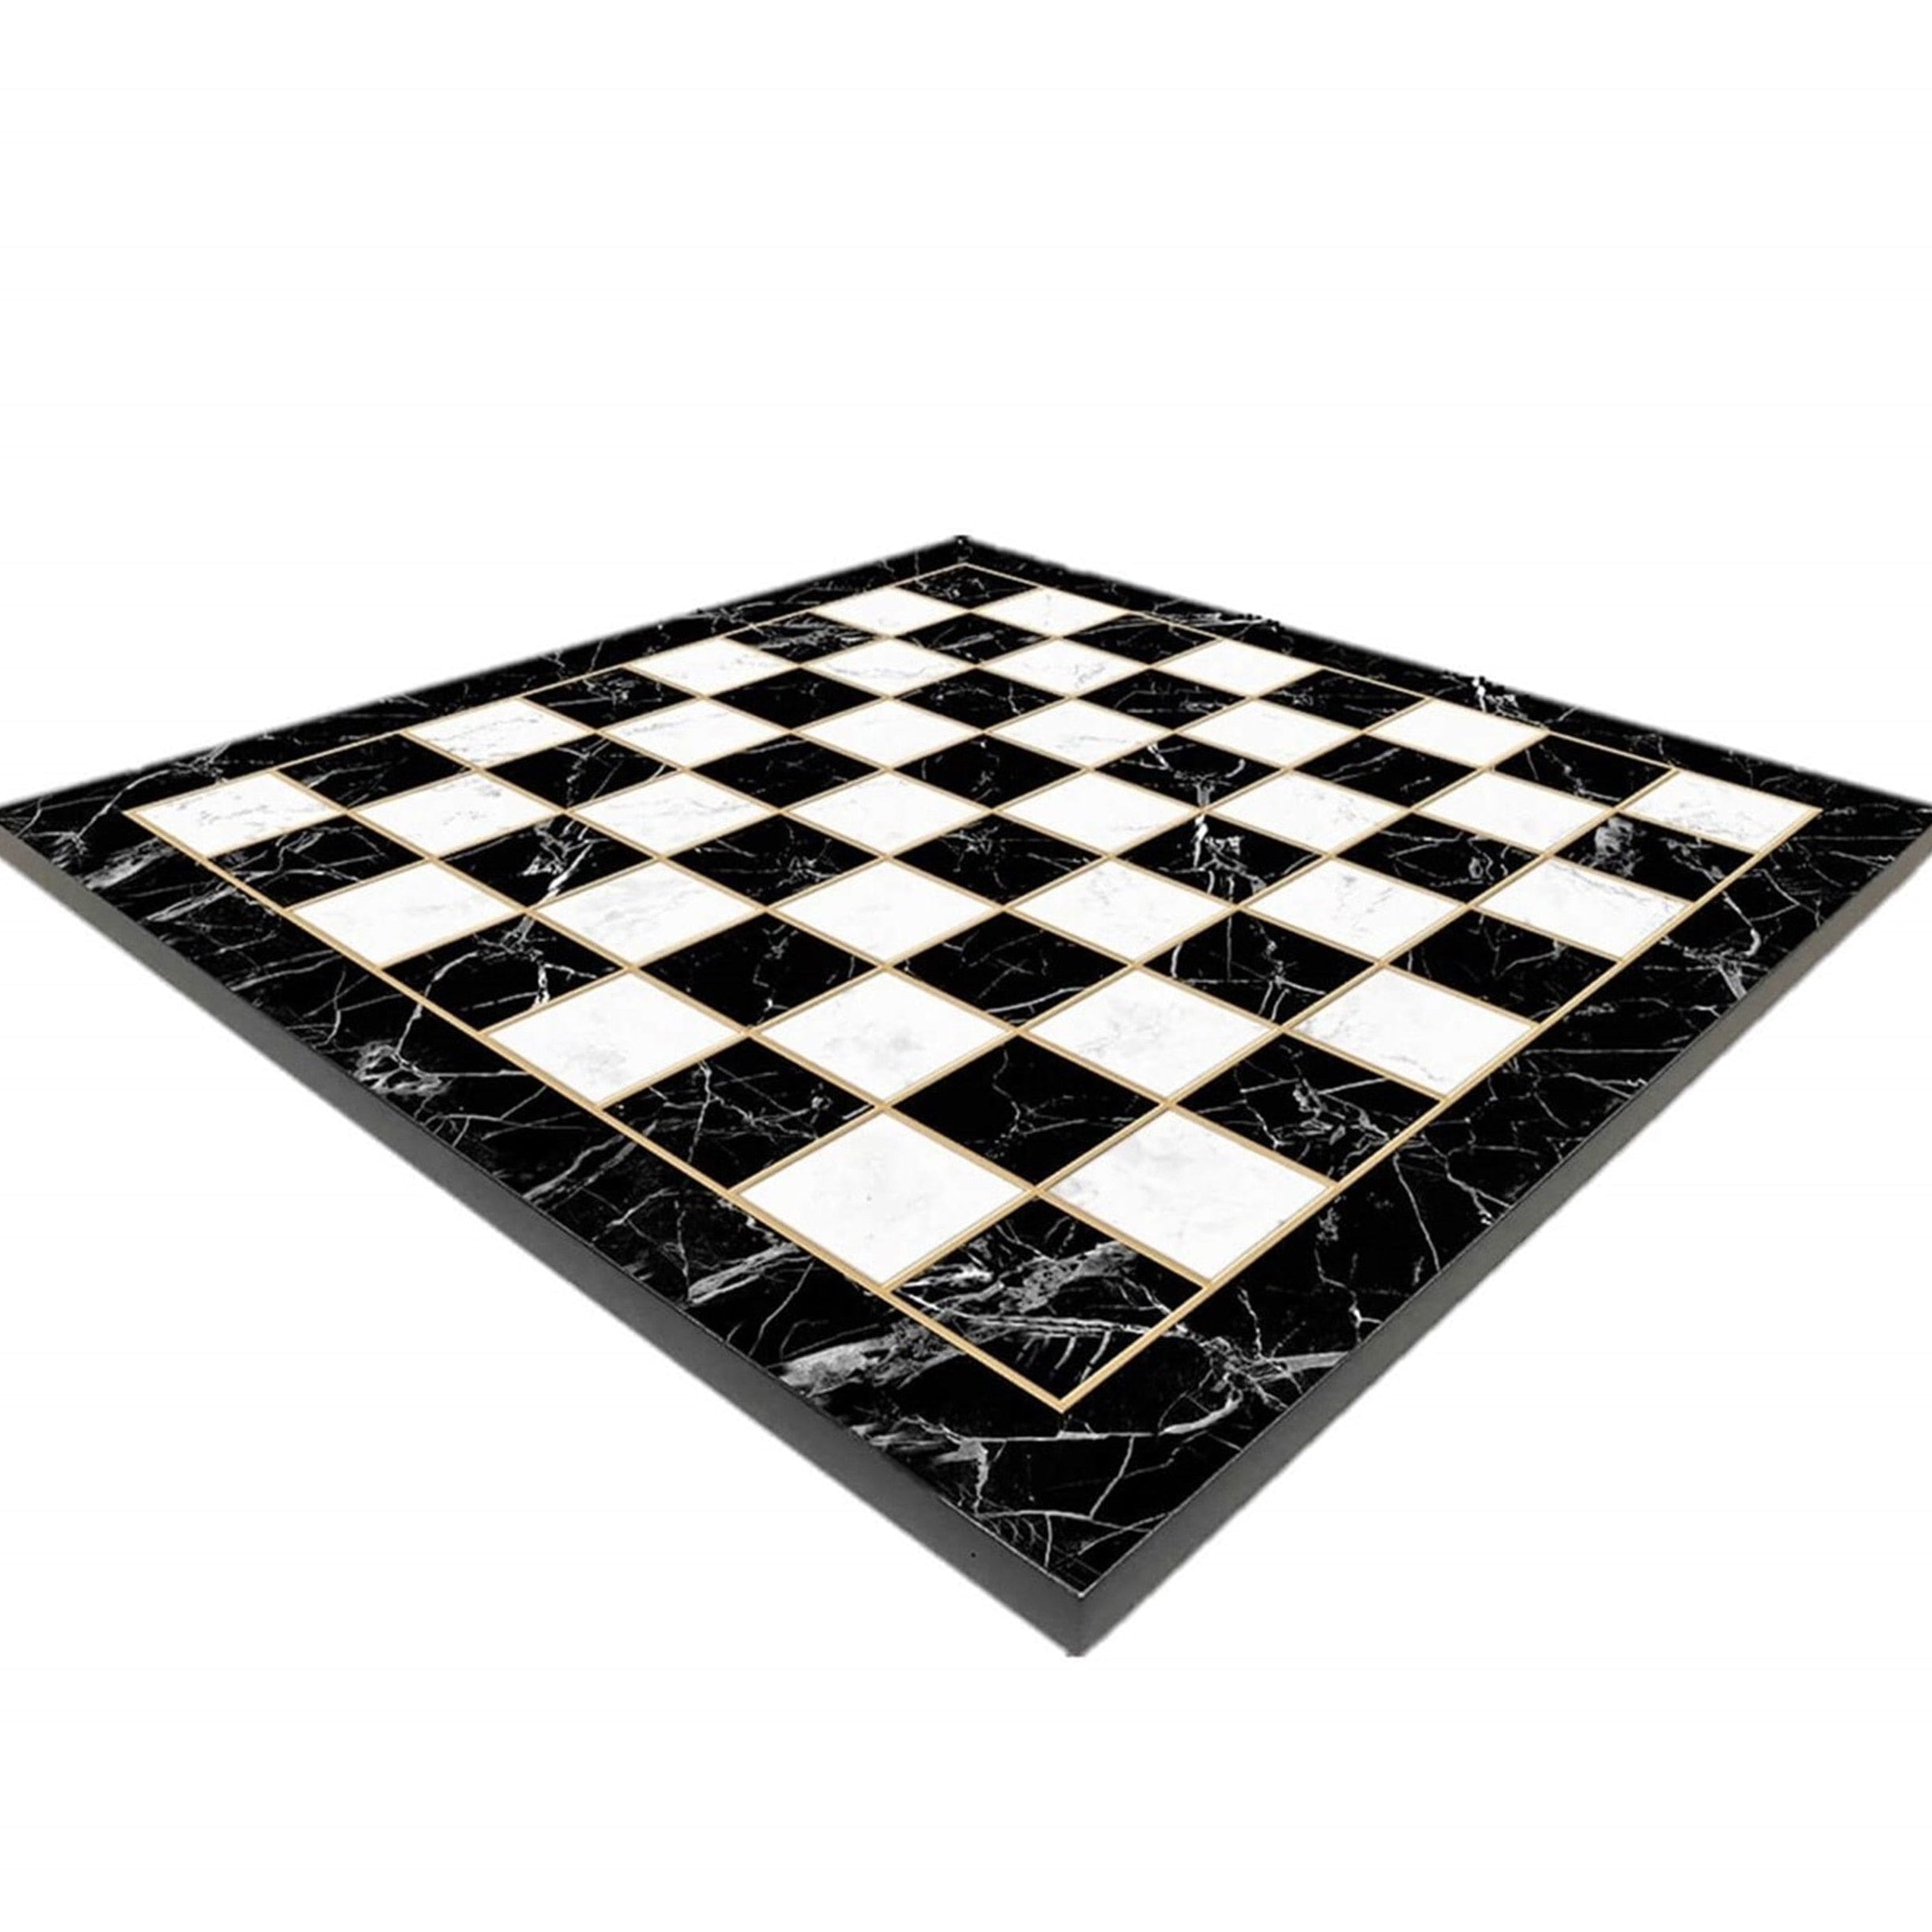 Marble Style Designer Board For Chess And Checkers | whatagift.com.au.